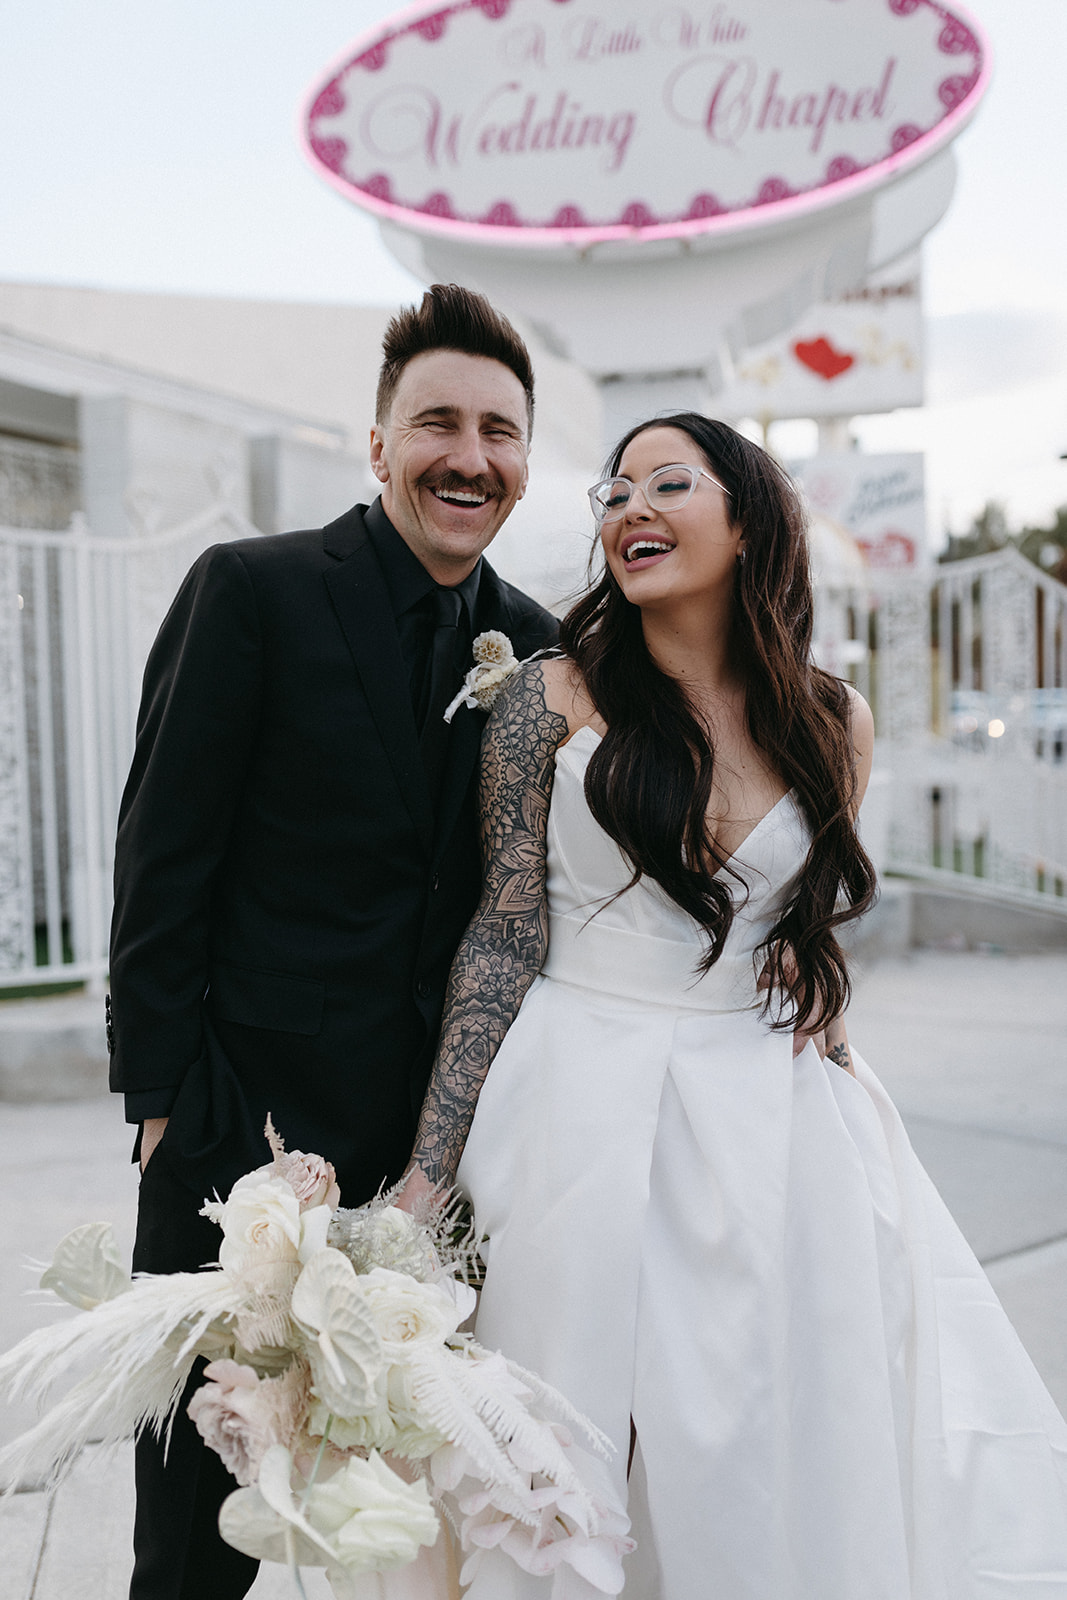 Groom in All Black Wedding Suit and Bride with Clear Statement Glasses and White Dress Outside Vegas Chapel 